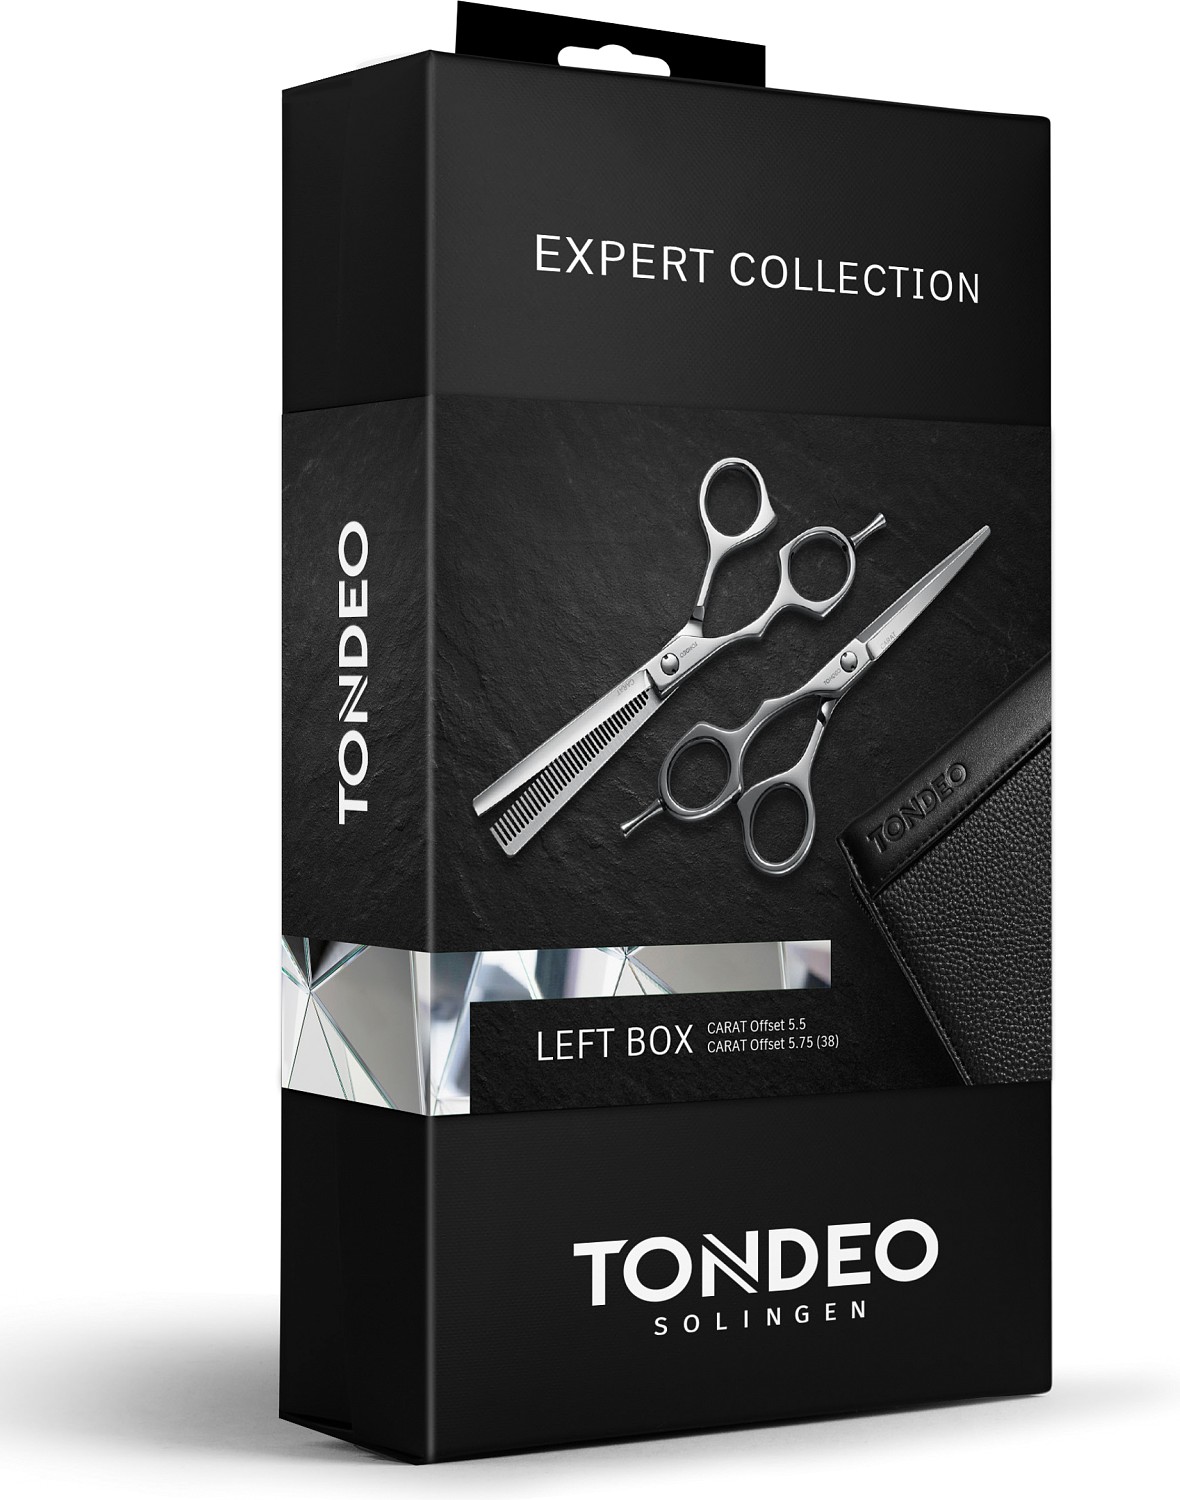  Tondeo Expert Collection Box Left Offset 5.5 